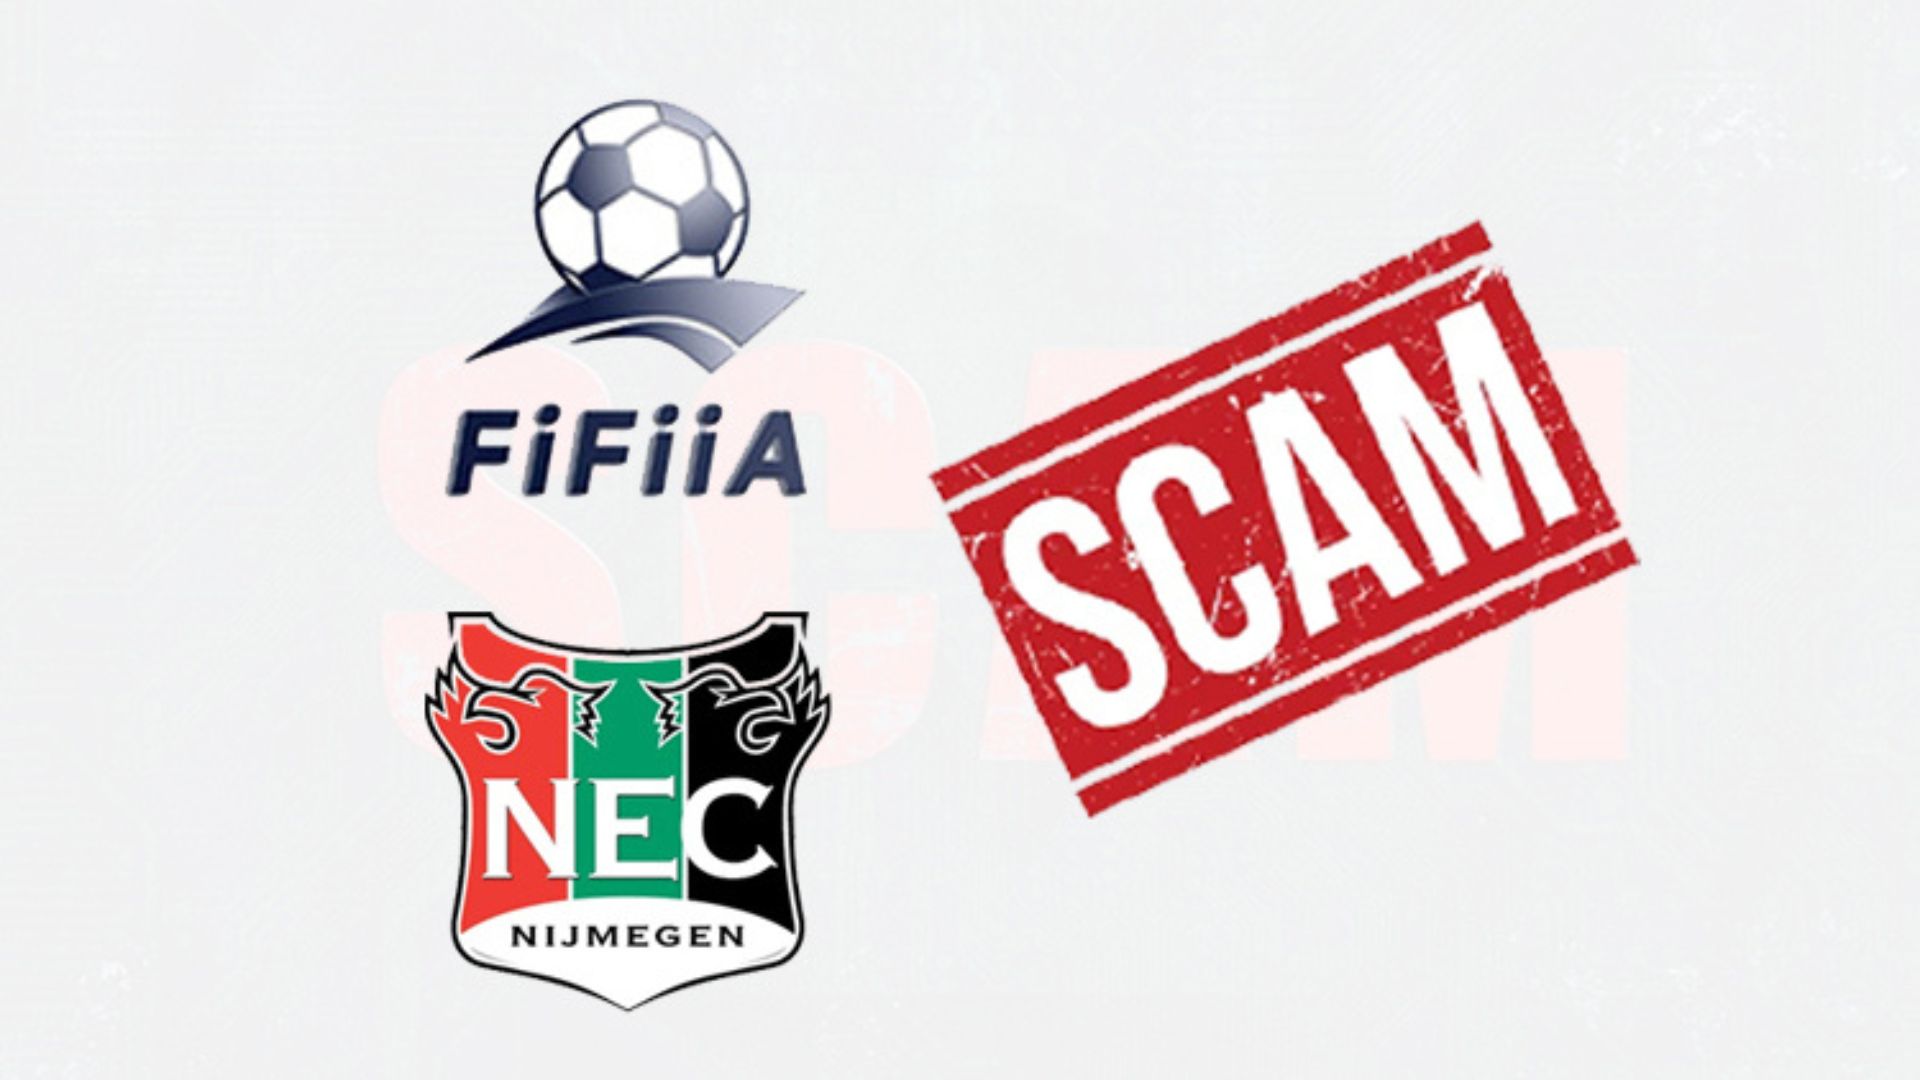 A New FIFA-Style betting Platform 'NEC Nijmegen' is Active to Cheat Nepali